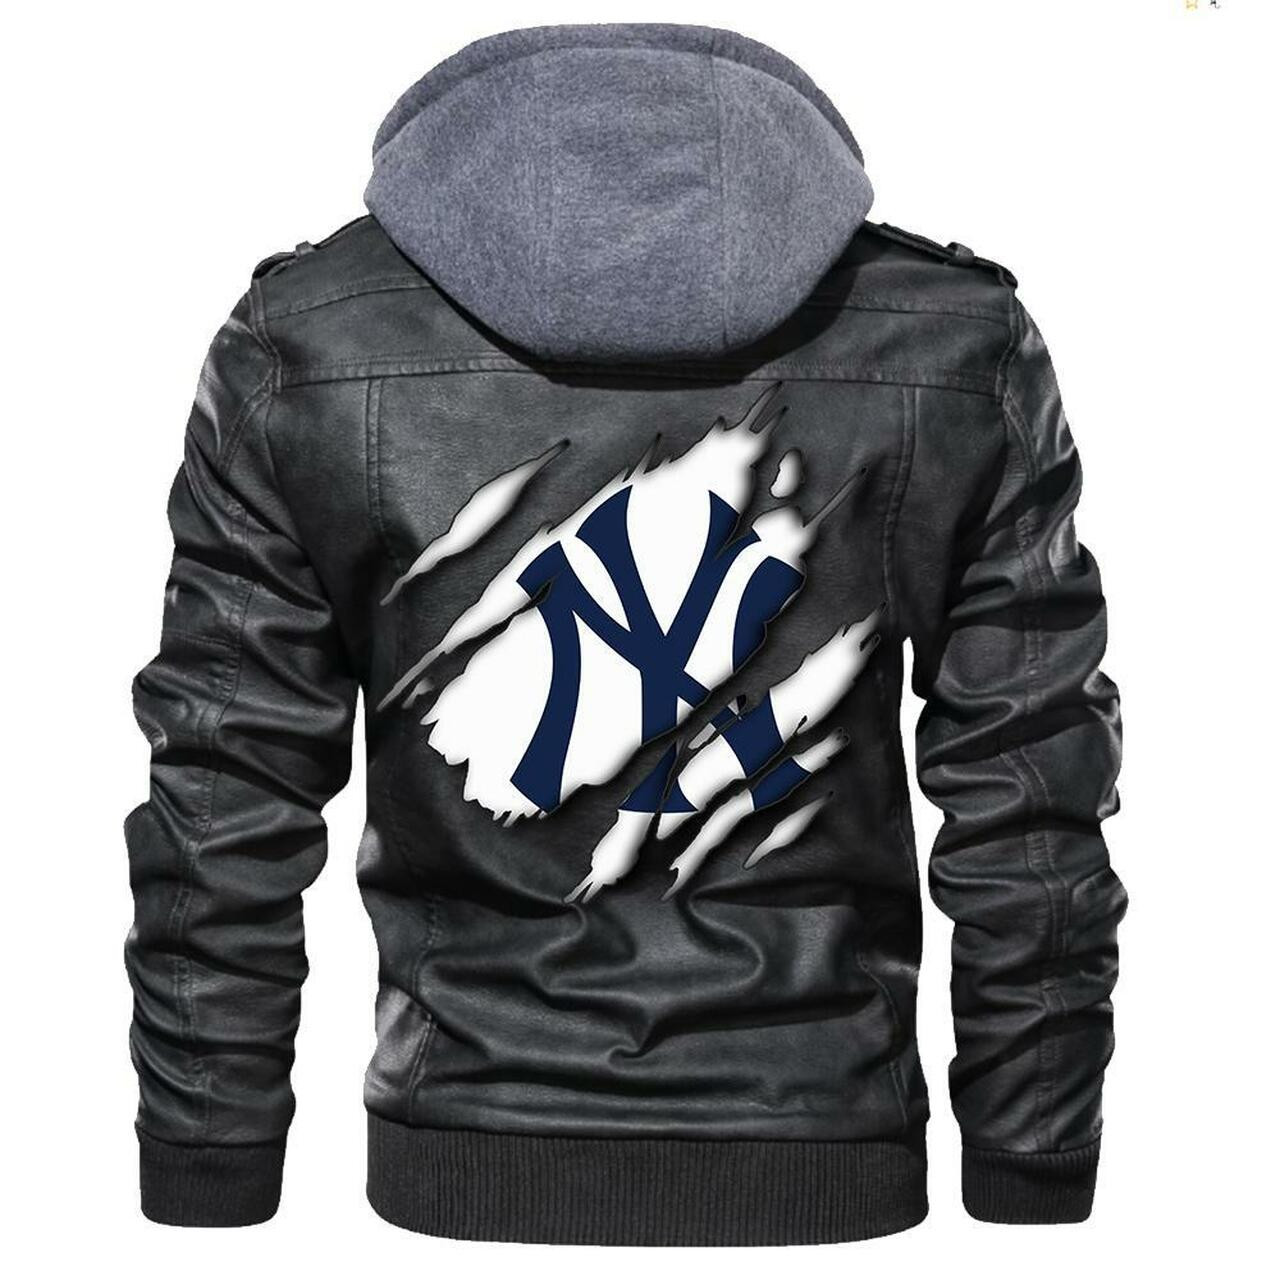 You'll get the best Leather Jacket by shopping online 97